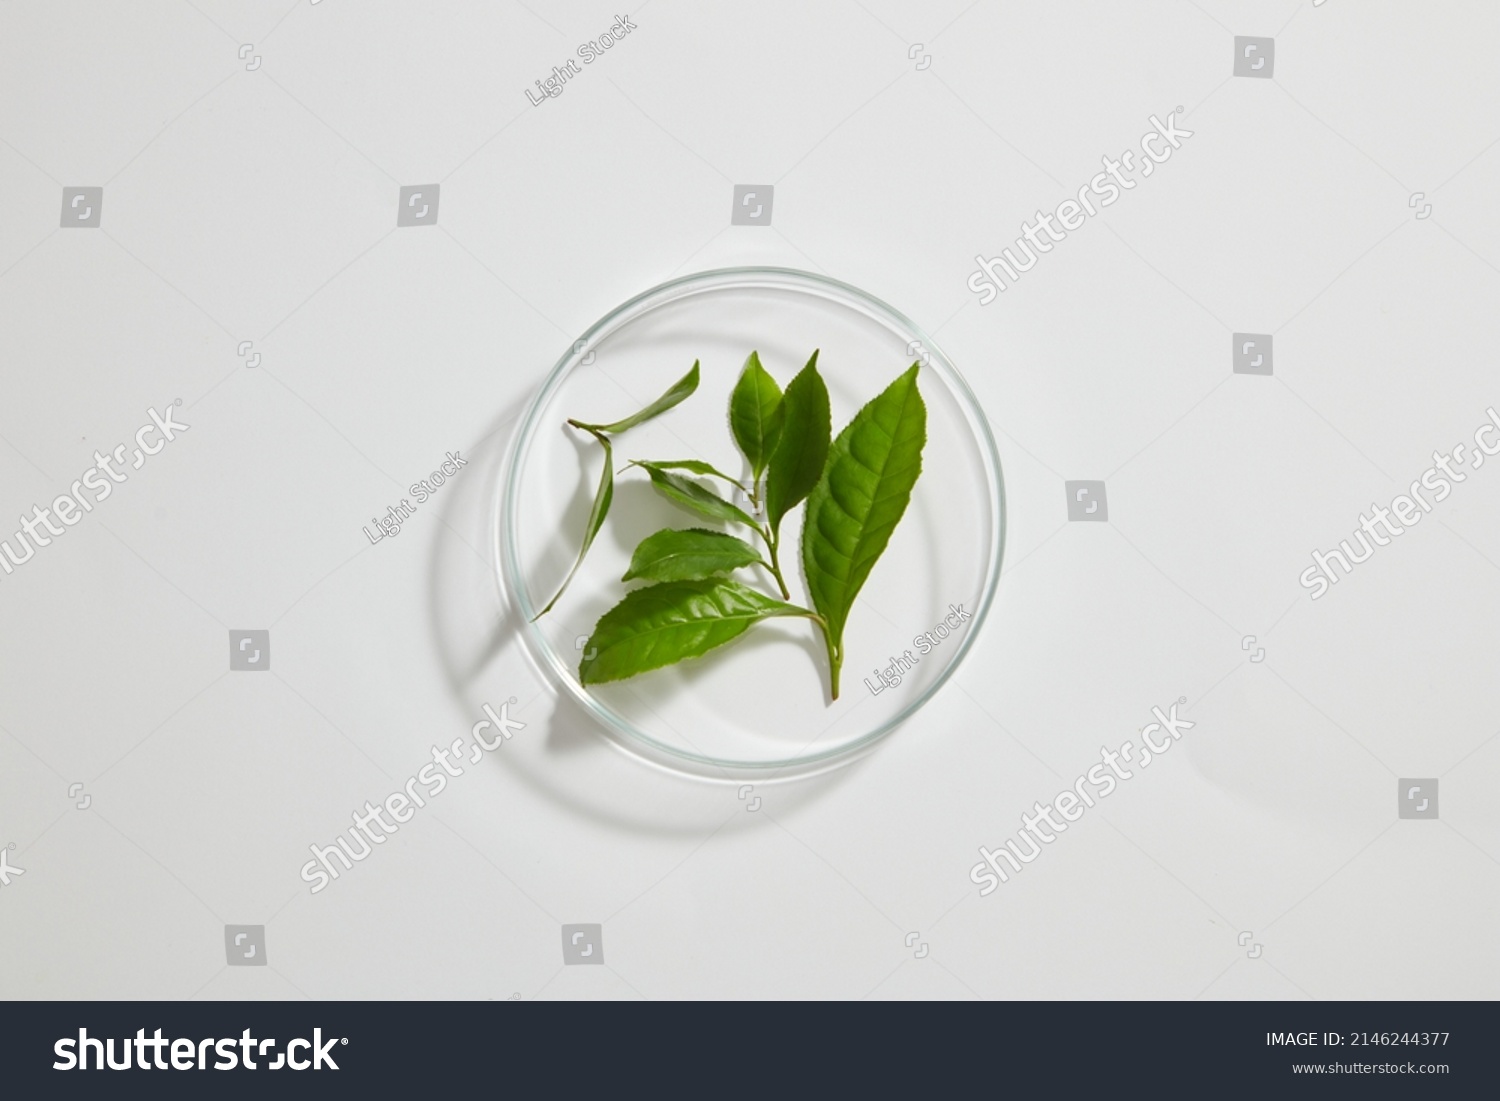 Top view of green tea extract decorated in petri dish and laboratory equipment in white background  #2146244377